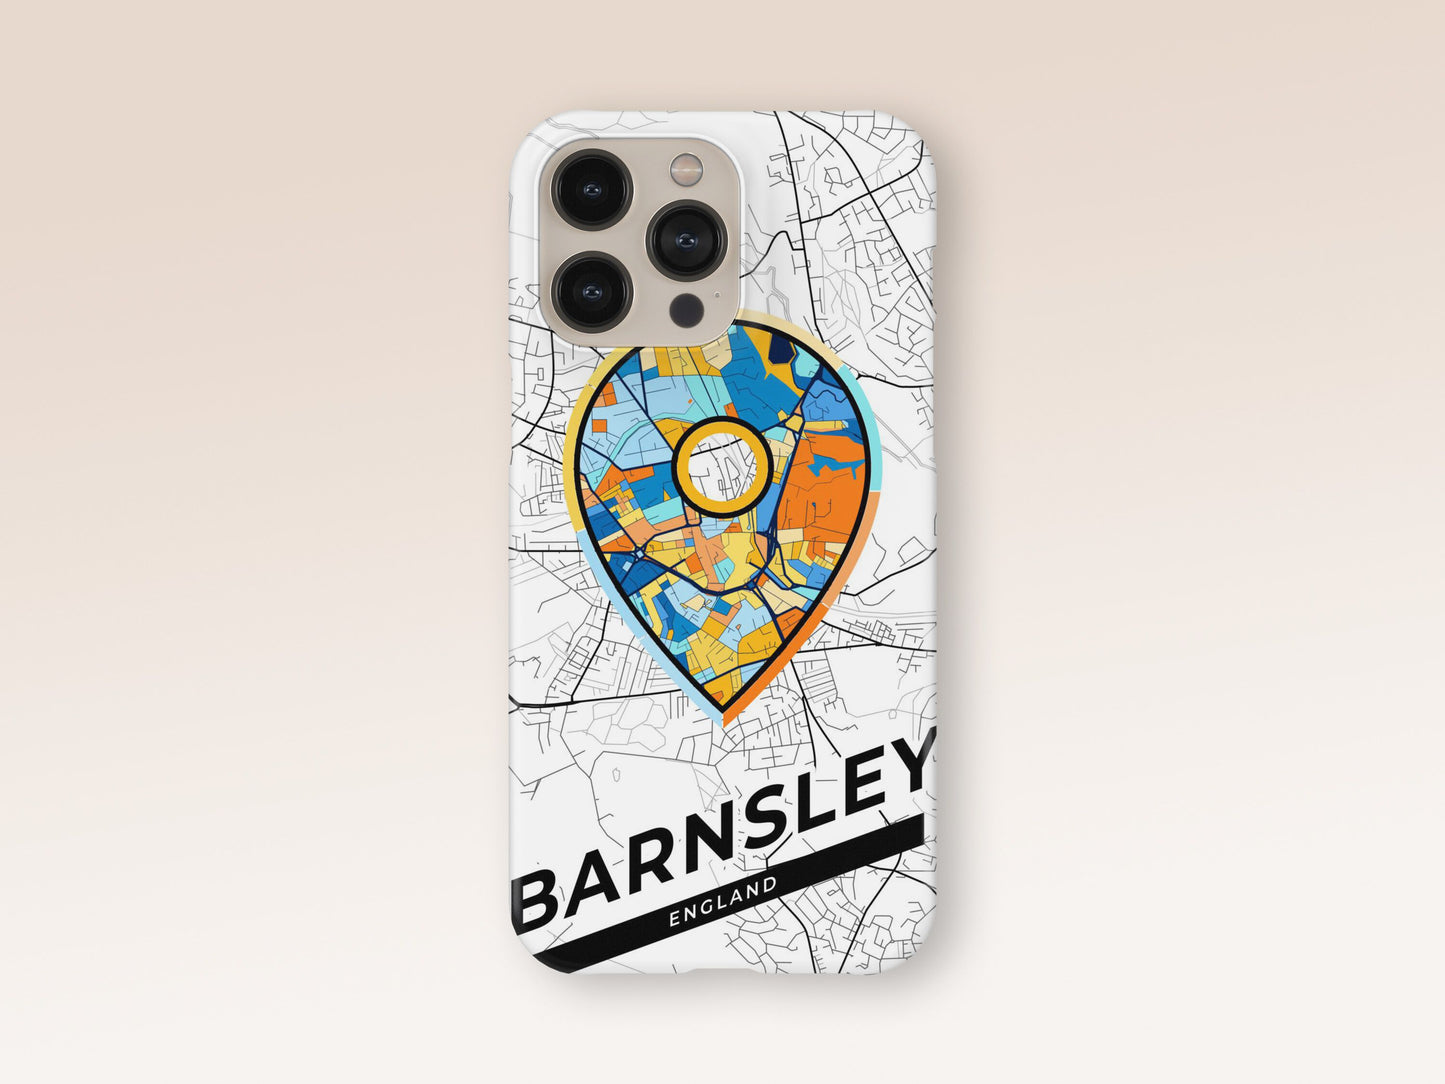 Barnsley England slim phone case with colorful icon. Birthday, wedding or housewarming gift. Couple match cases. 1